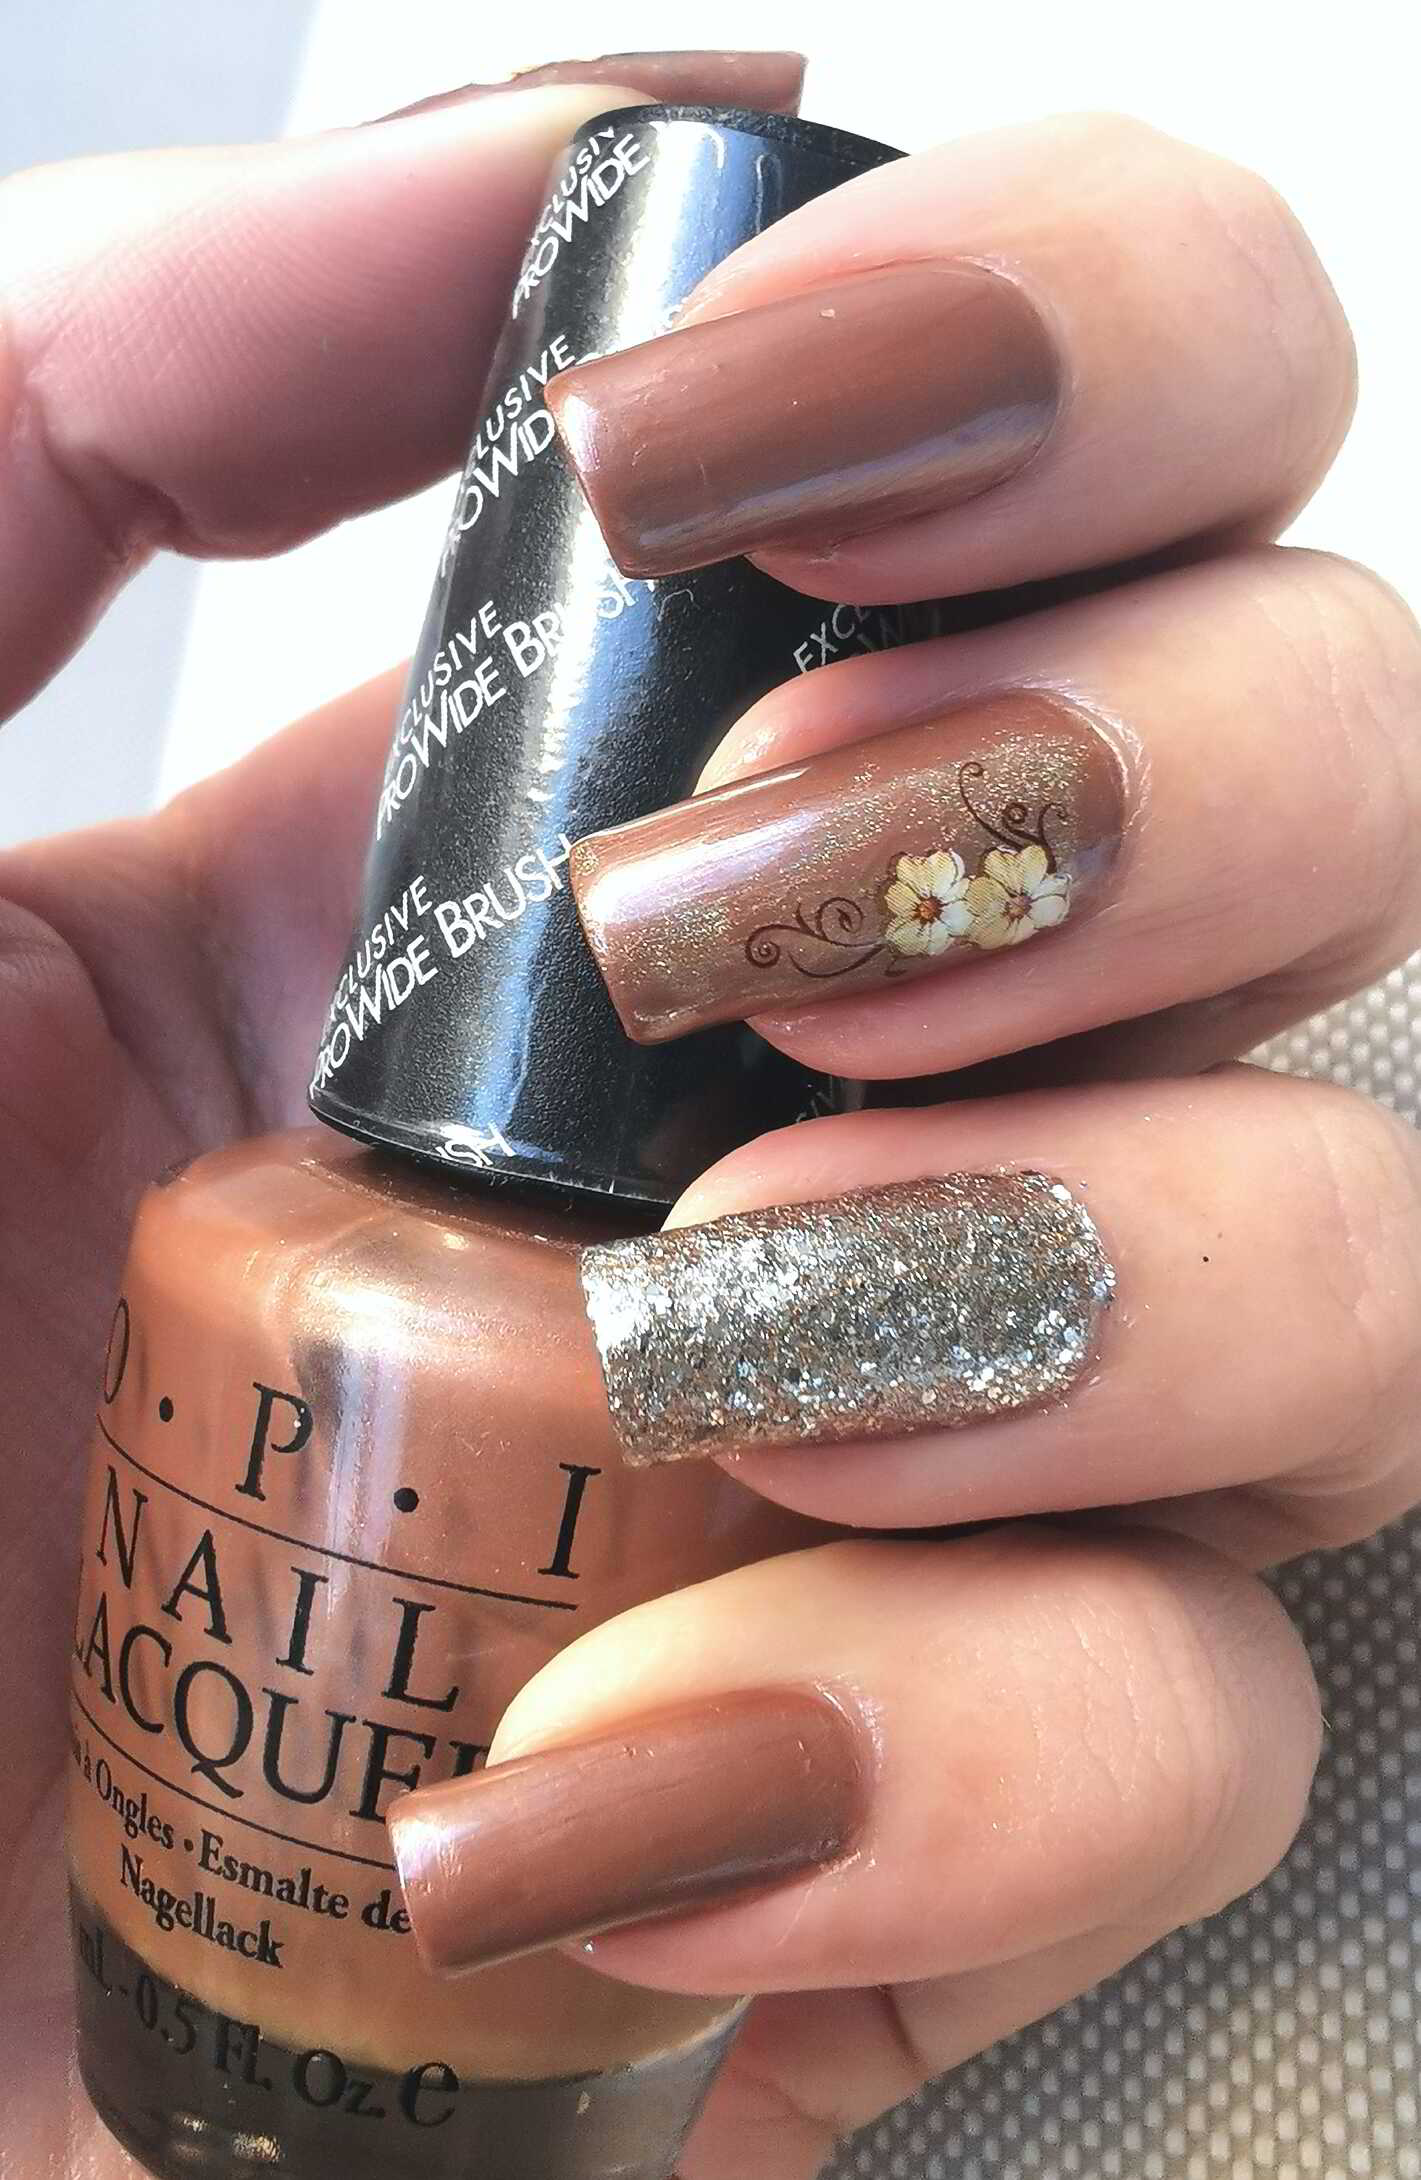 Nail polish manicure of shade NCLA Grace, Color Club Good As Gold,OPI Innsbruck Bronze